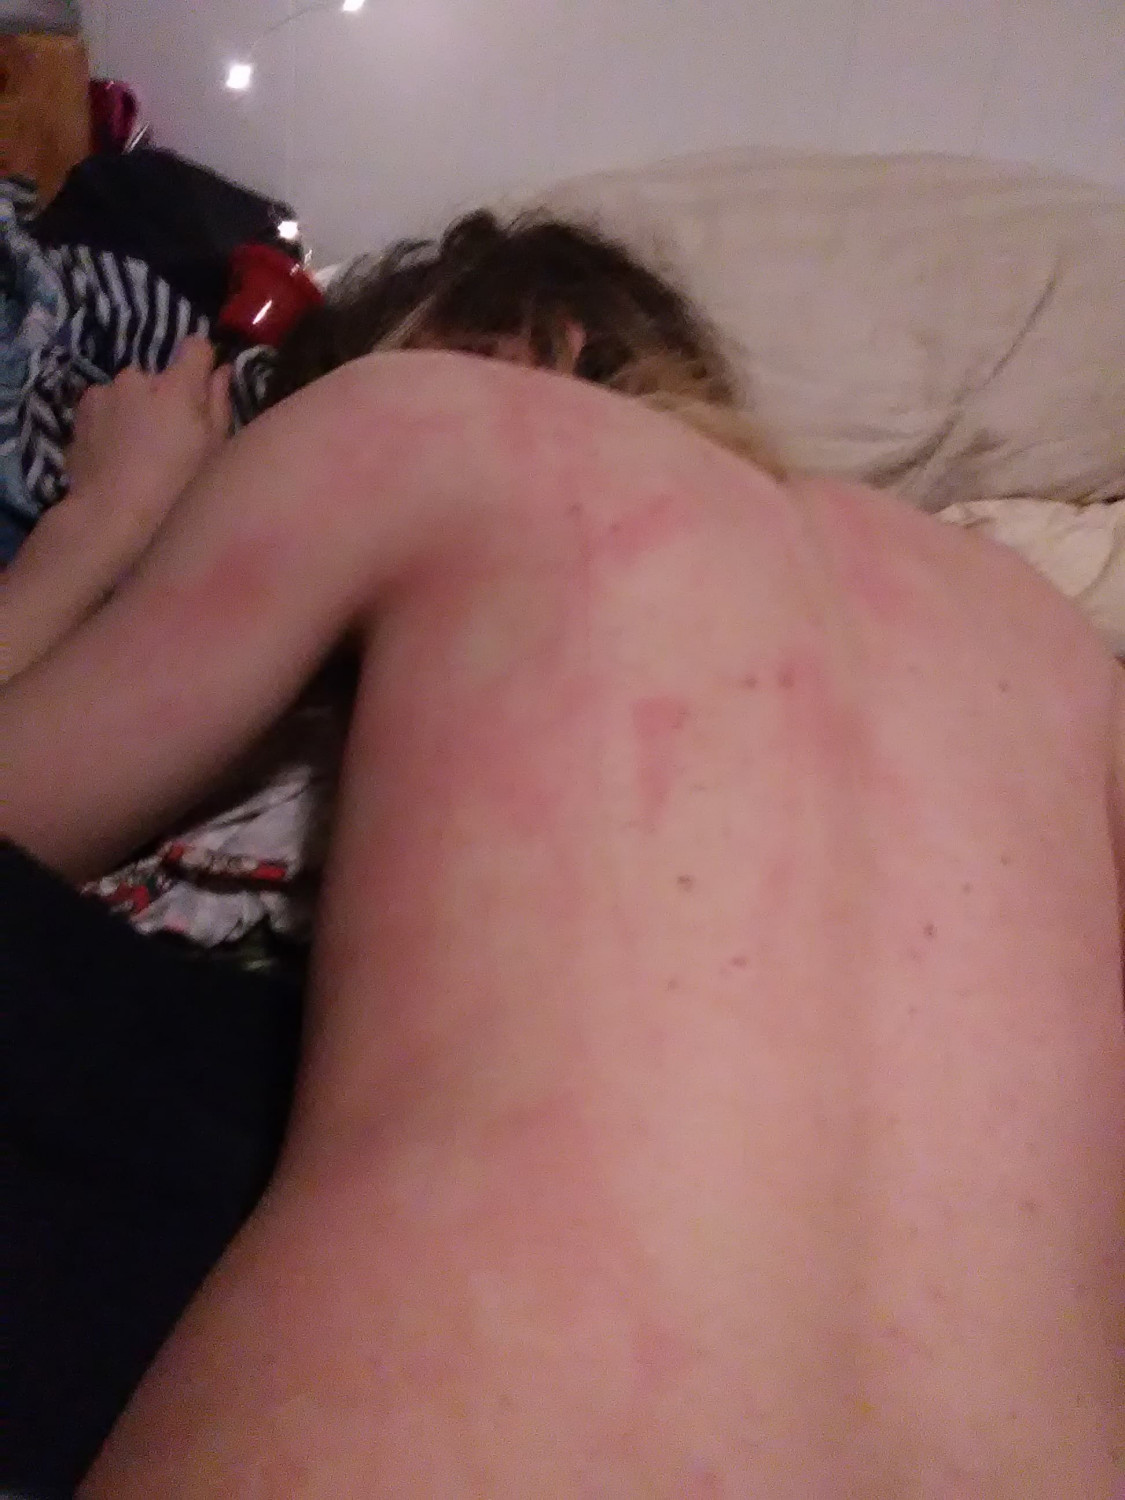 Getting beaten and abused - Porn Videos & Photos - EroMe